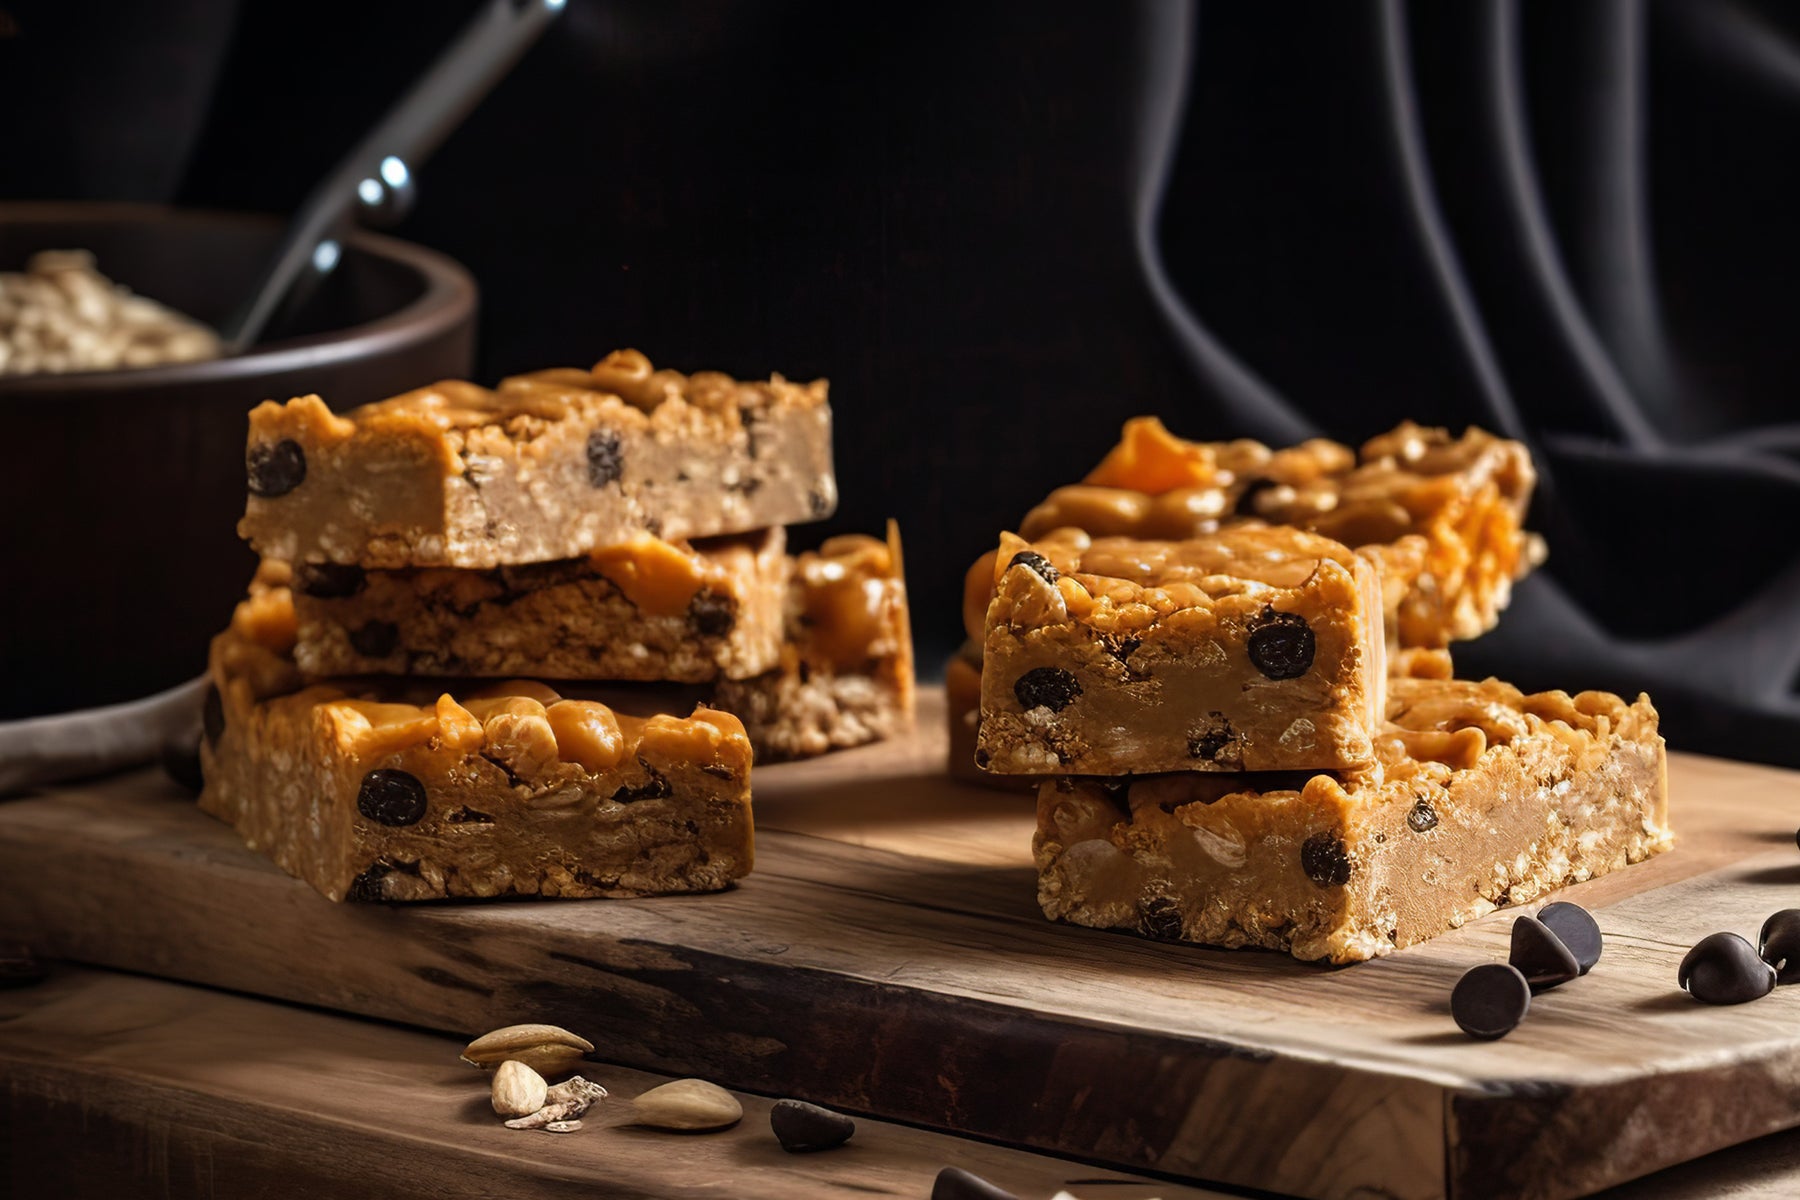 Satisfy Your Sweet Tooth Without Spiking Your Blood Sugar: No-Bake Chocolate Peanut Butter Bars